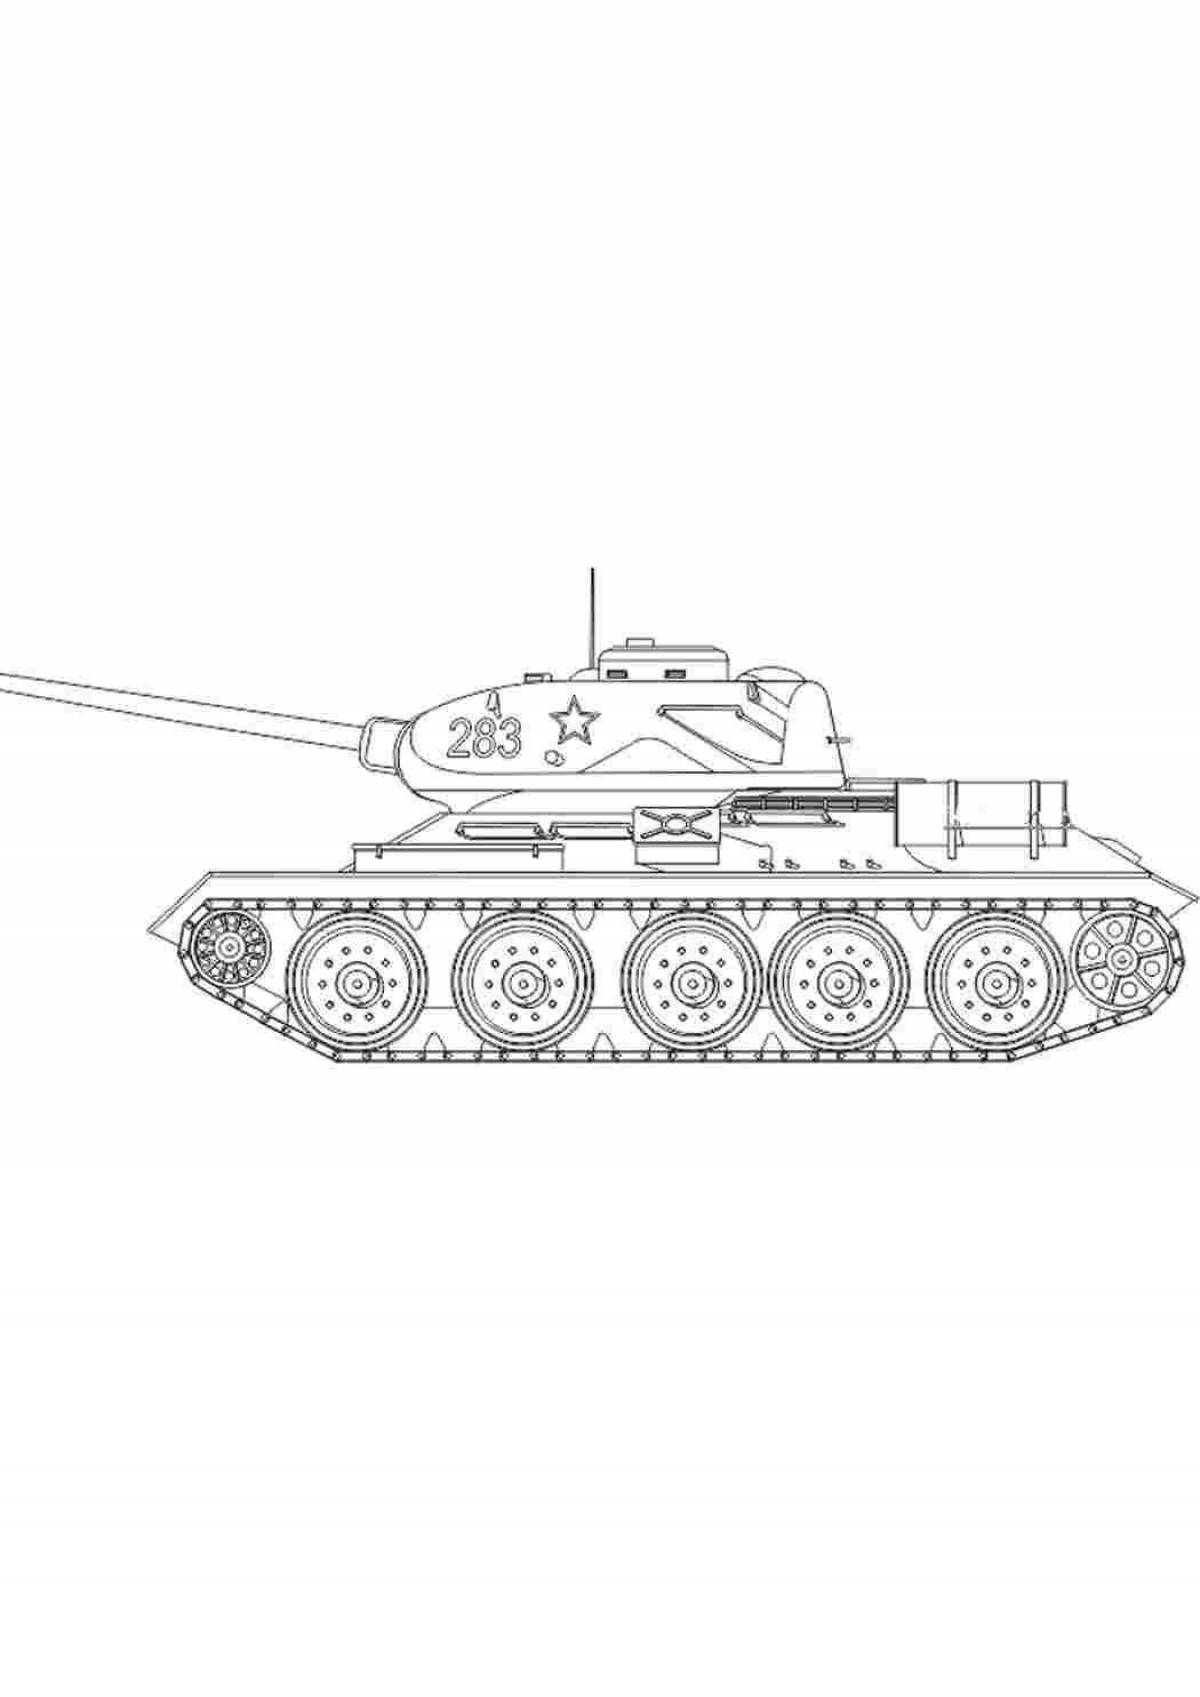 Colorful tank t34 85 coloring book